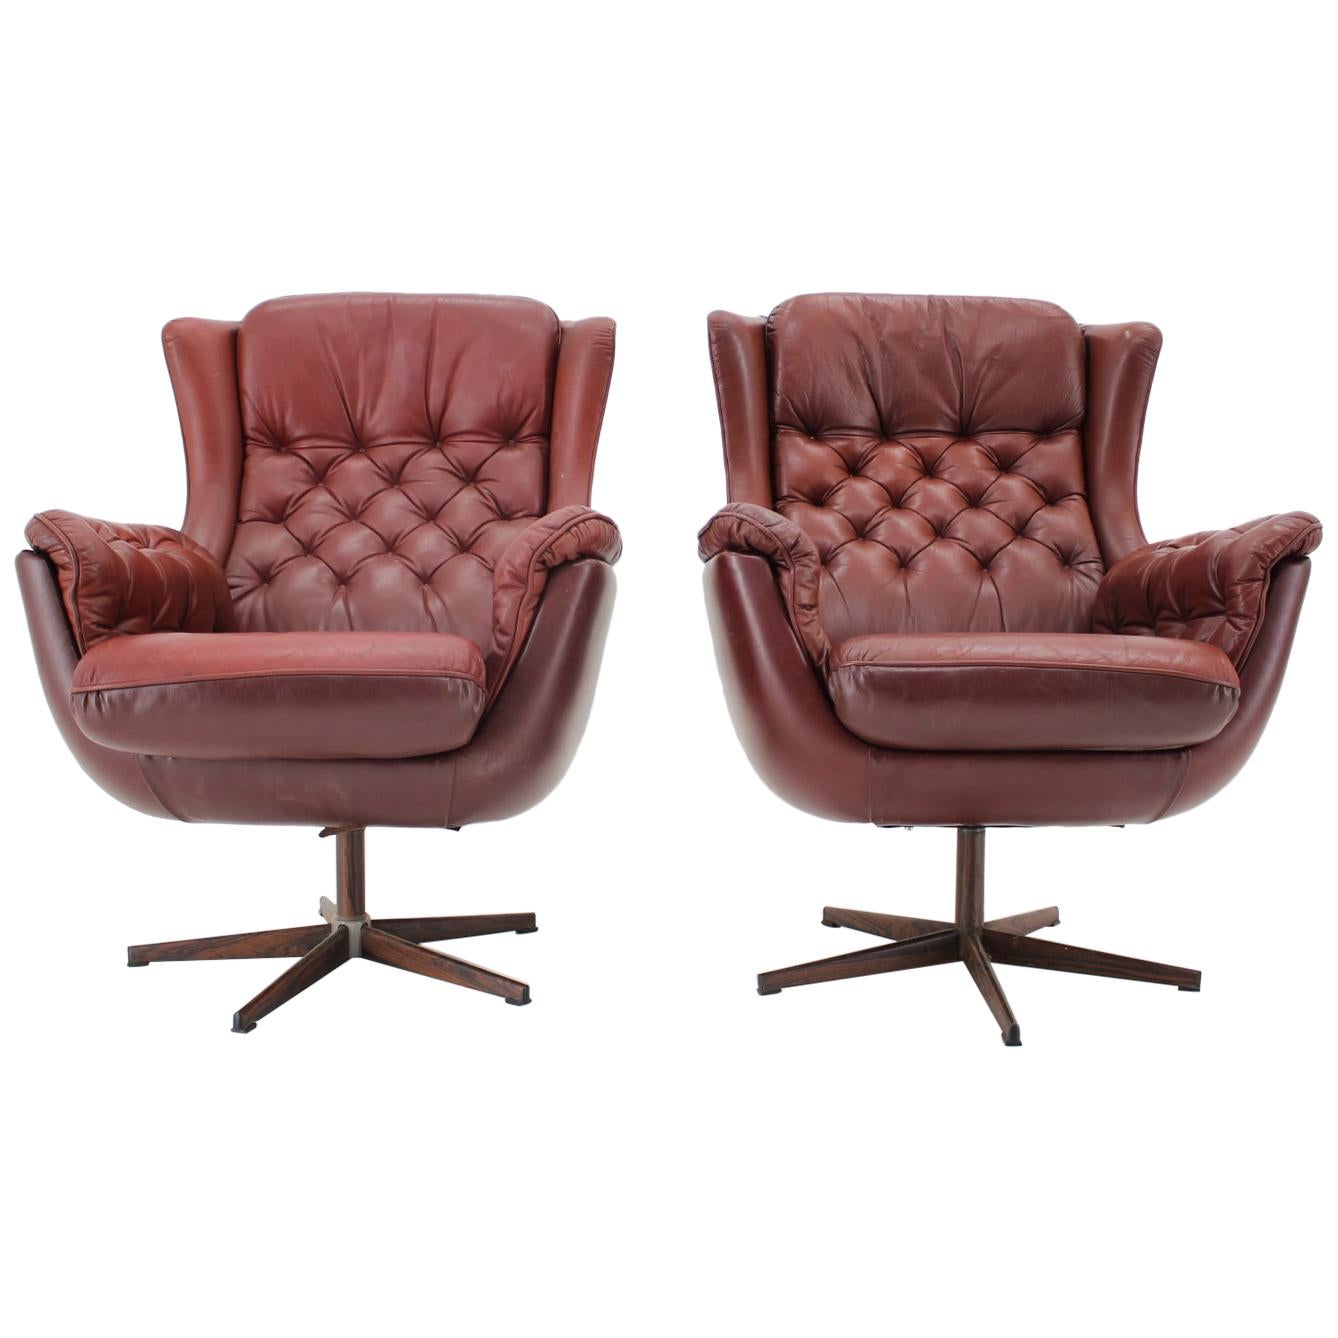 Design Scandinavian Leather Armchairs / Lounge Chairs by Peem, 1970s, Finland